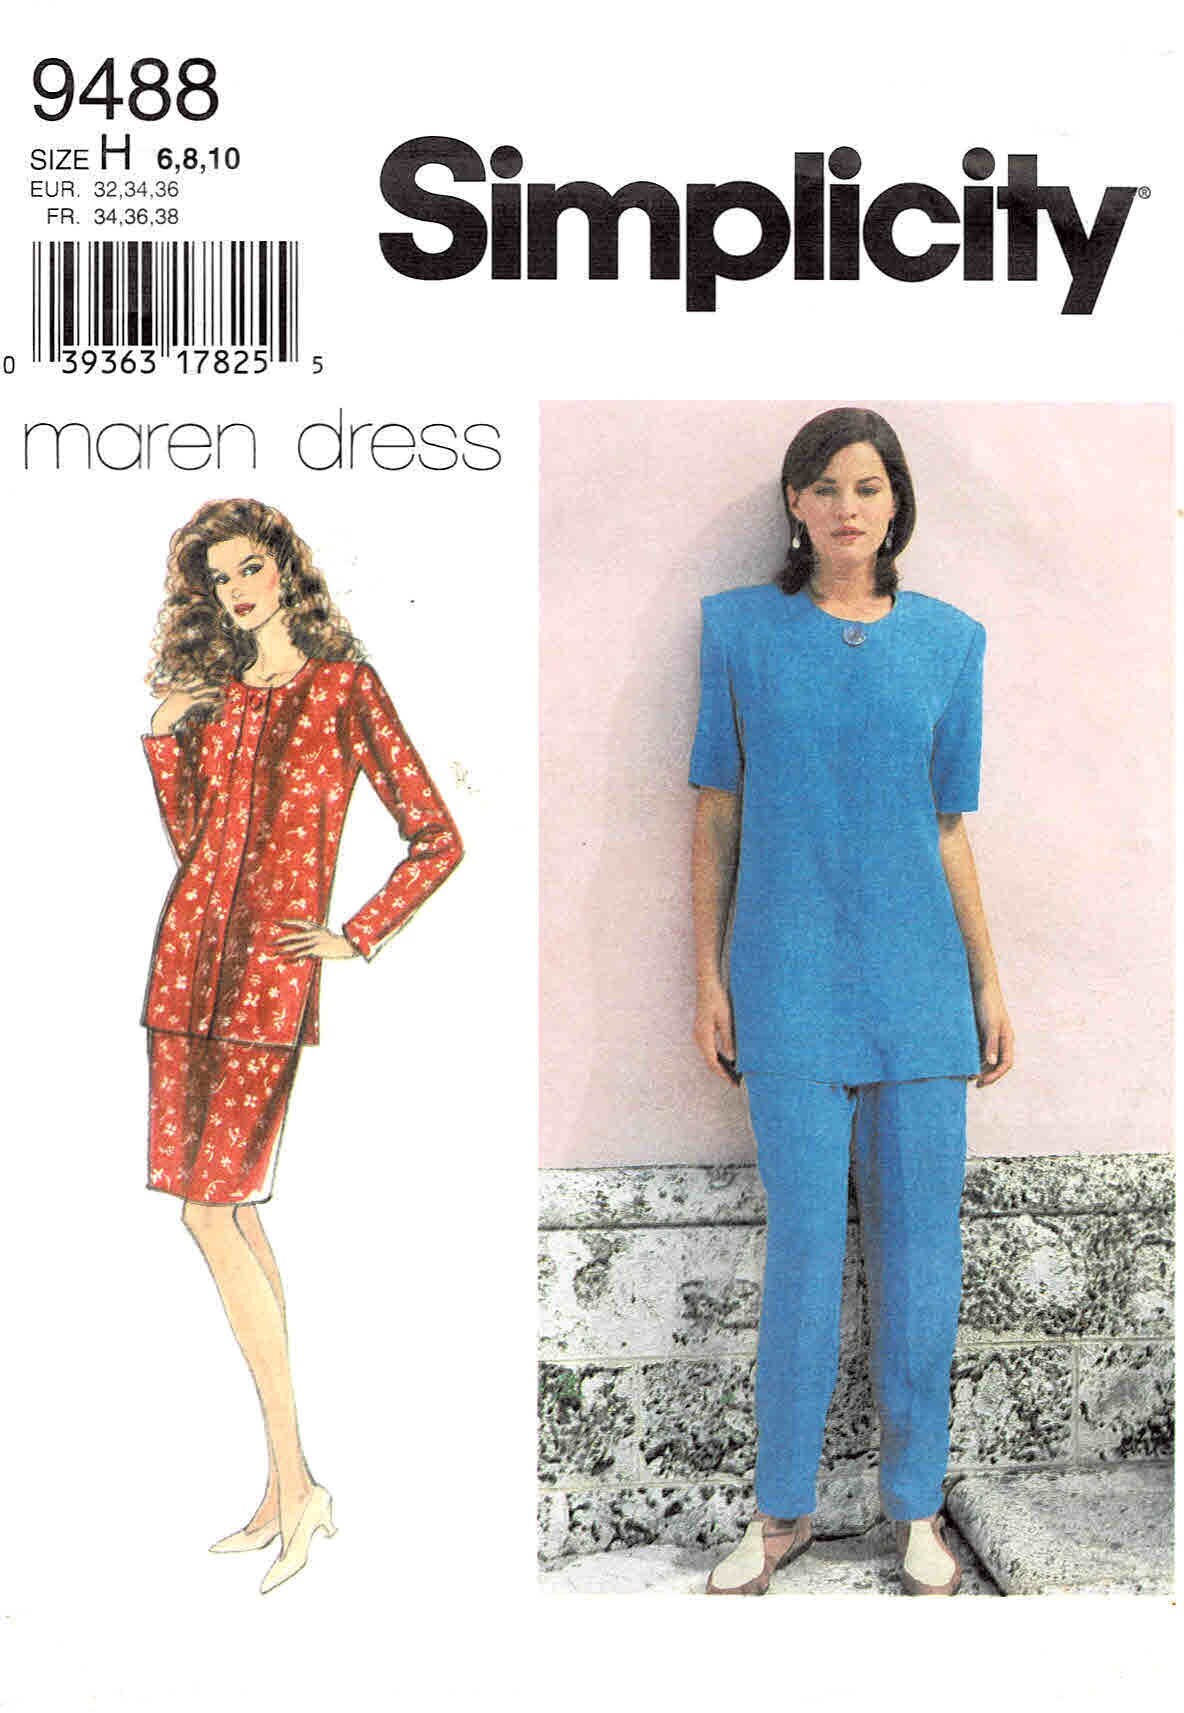 1996 Misses V Neck Front Toggle Top Pull On Crop Pants or Shorts UC FF Size 14,16,18 Simplicity Maren Dress Sewing Pattern 7125